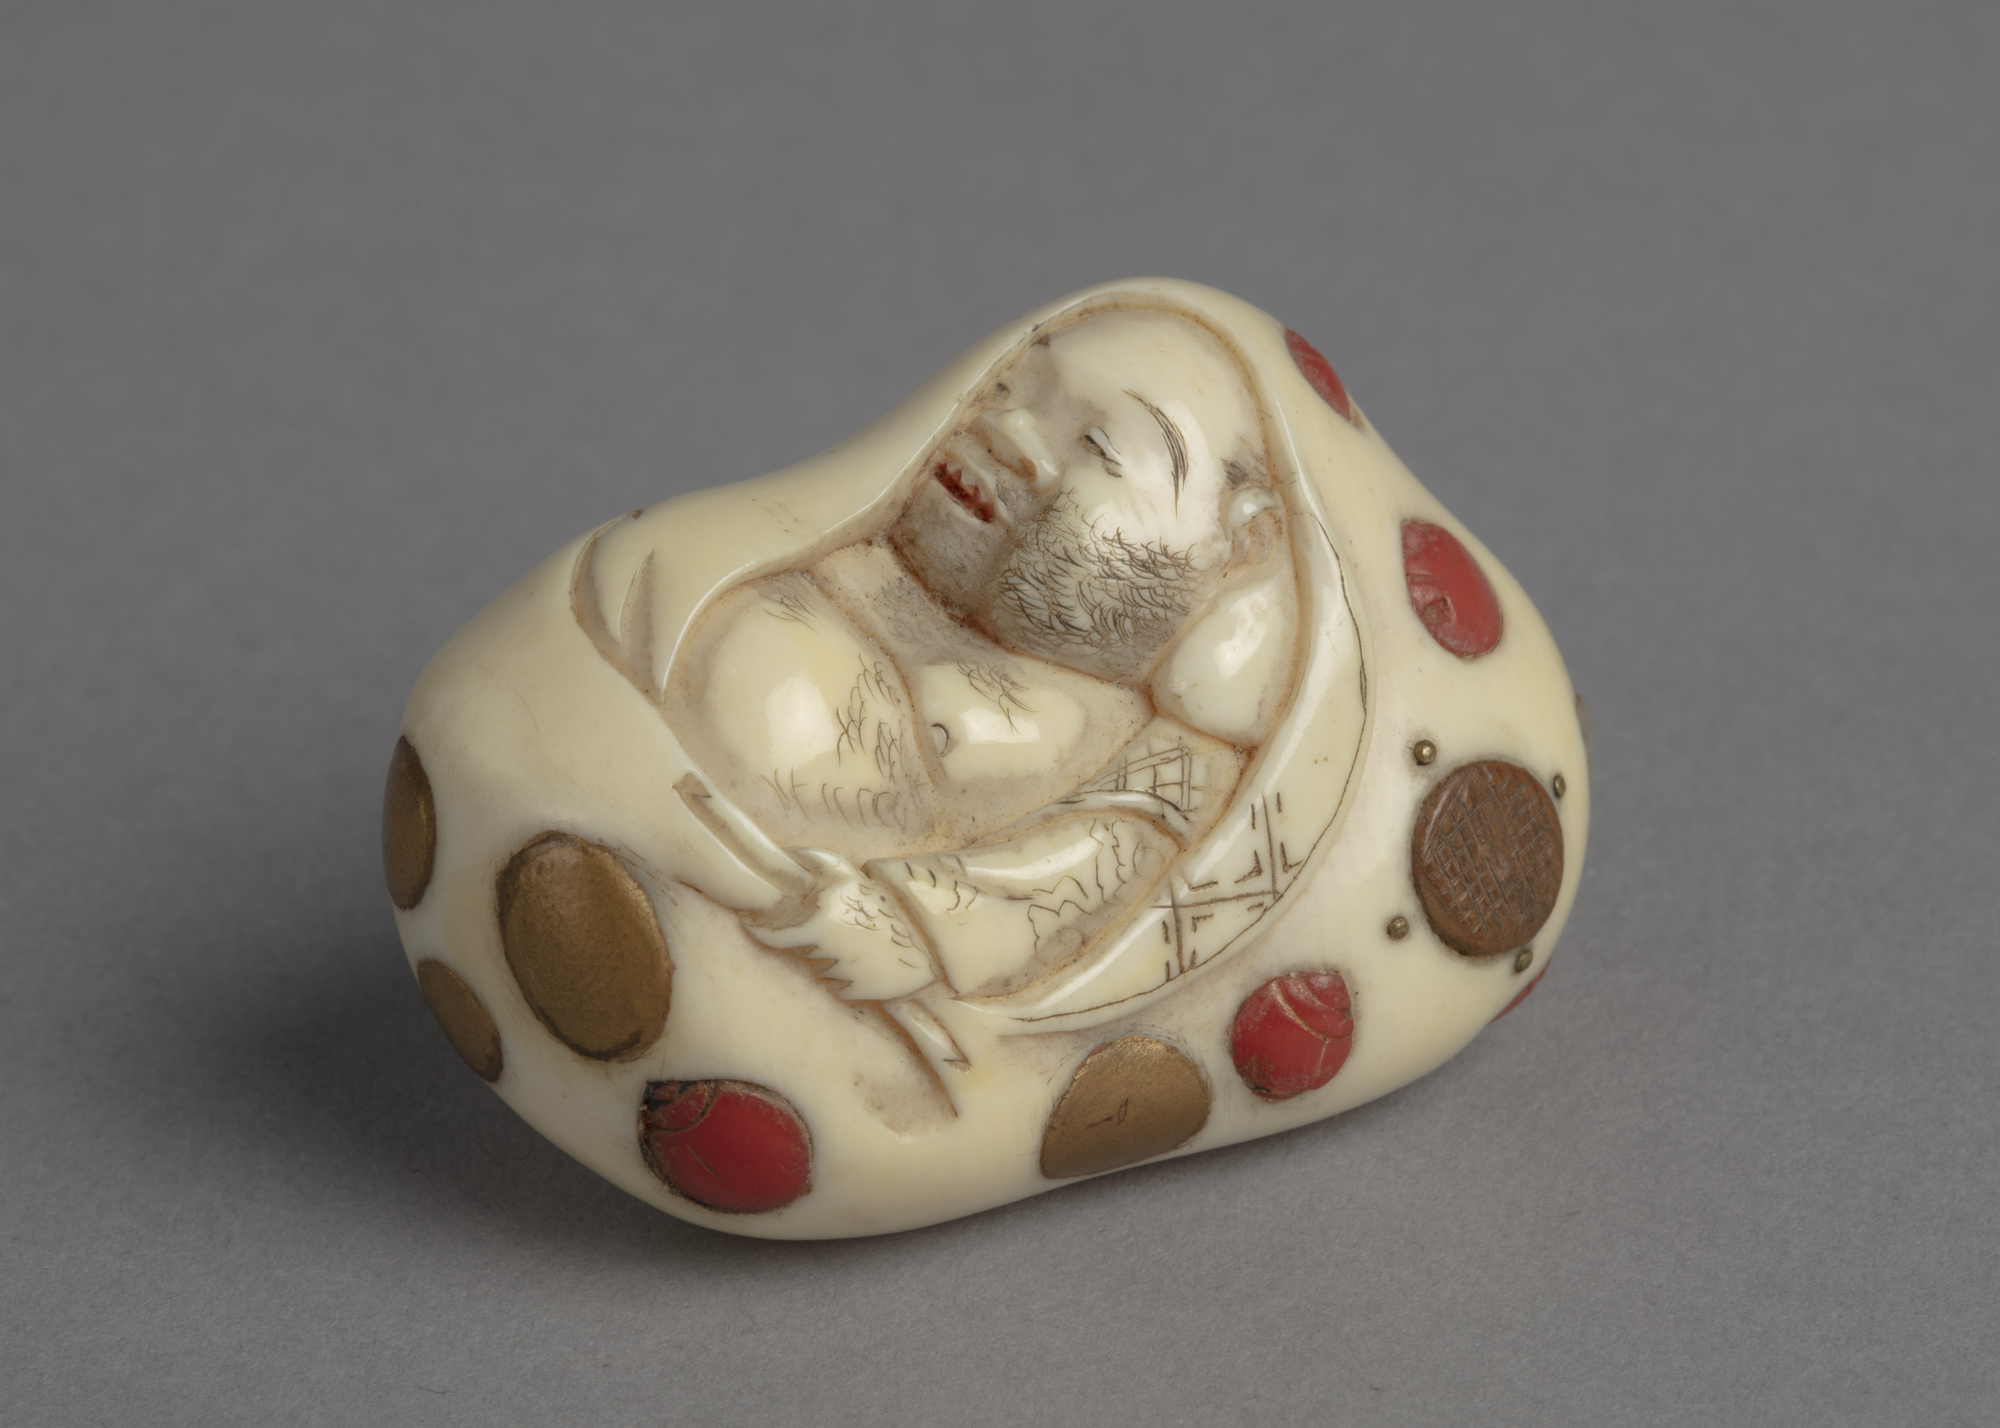 A Japanese ivory netsuke inlay with abalone, red coral, wood and gold paint, of Hotei asleep in his treasure bag.